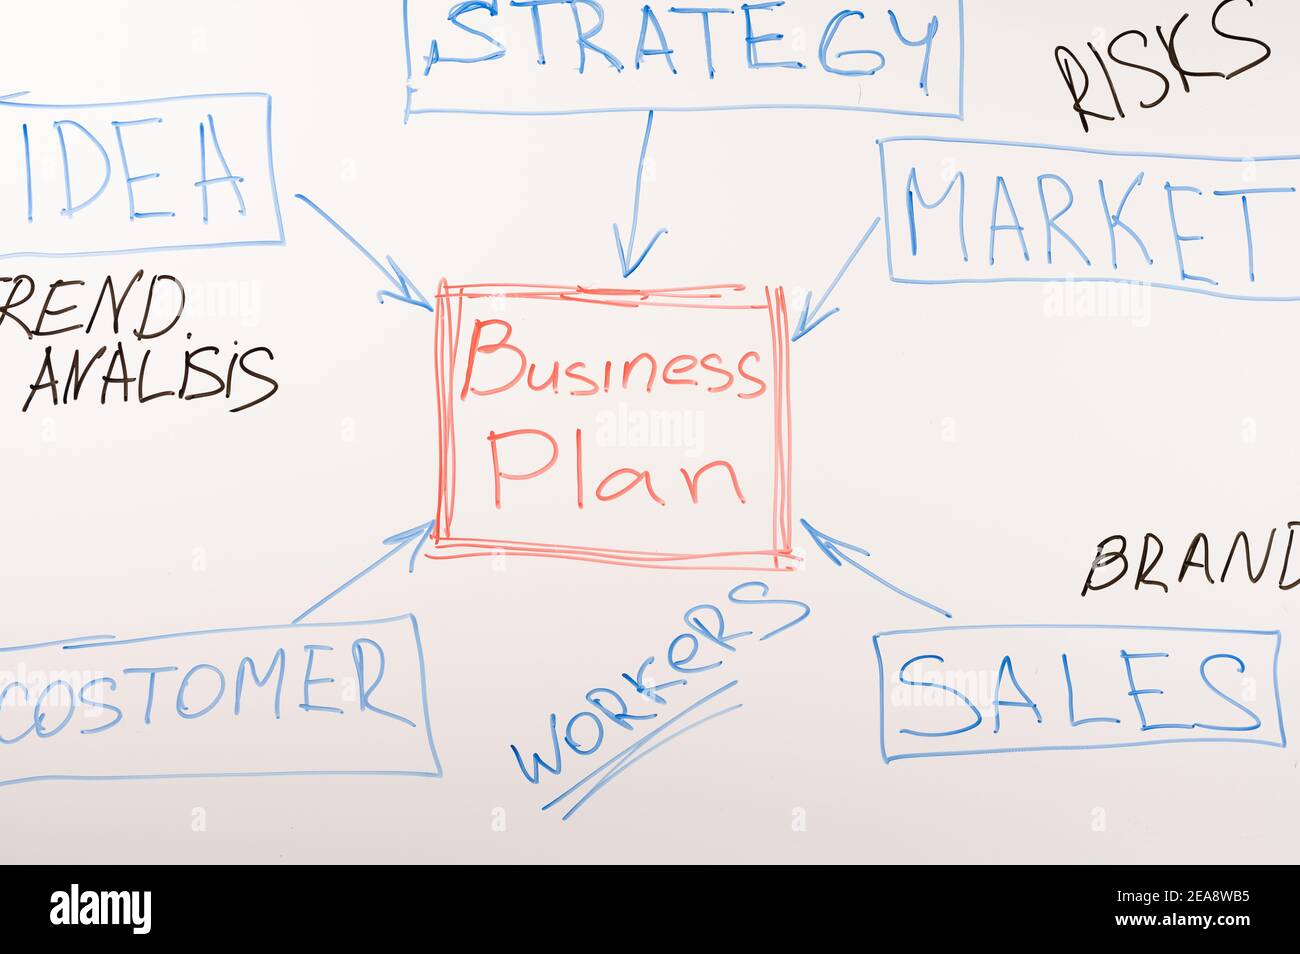 Business plan block diagram on whiteboard. brainstorm, discourse, business plan discussion. white marker board with drawn business plan elements. busi Stock Photo